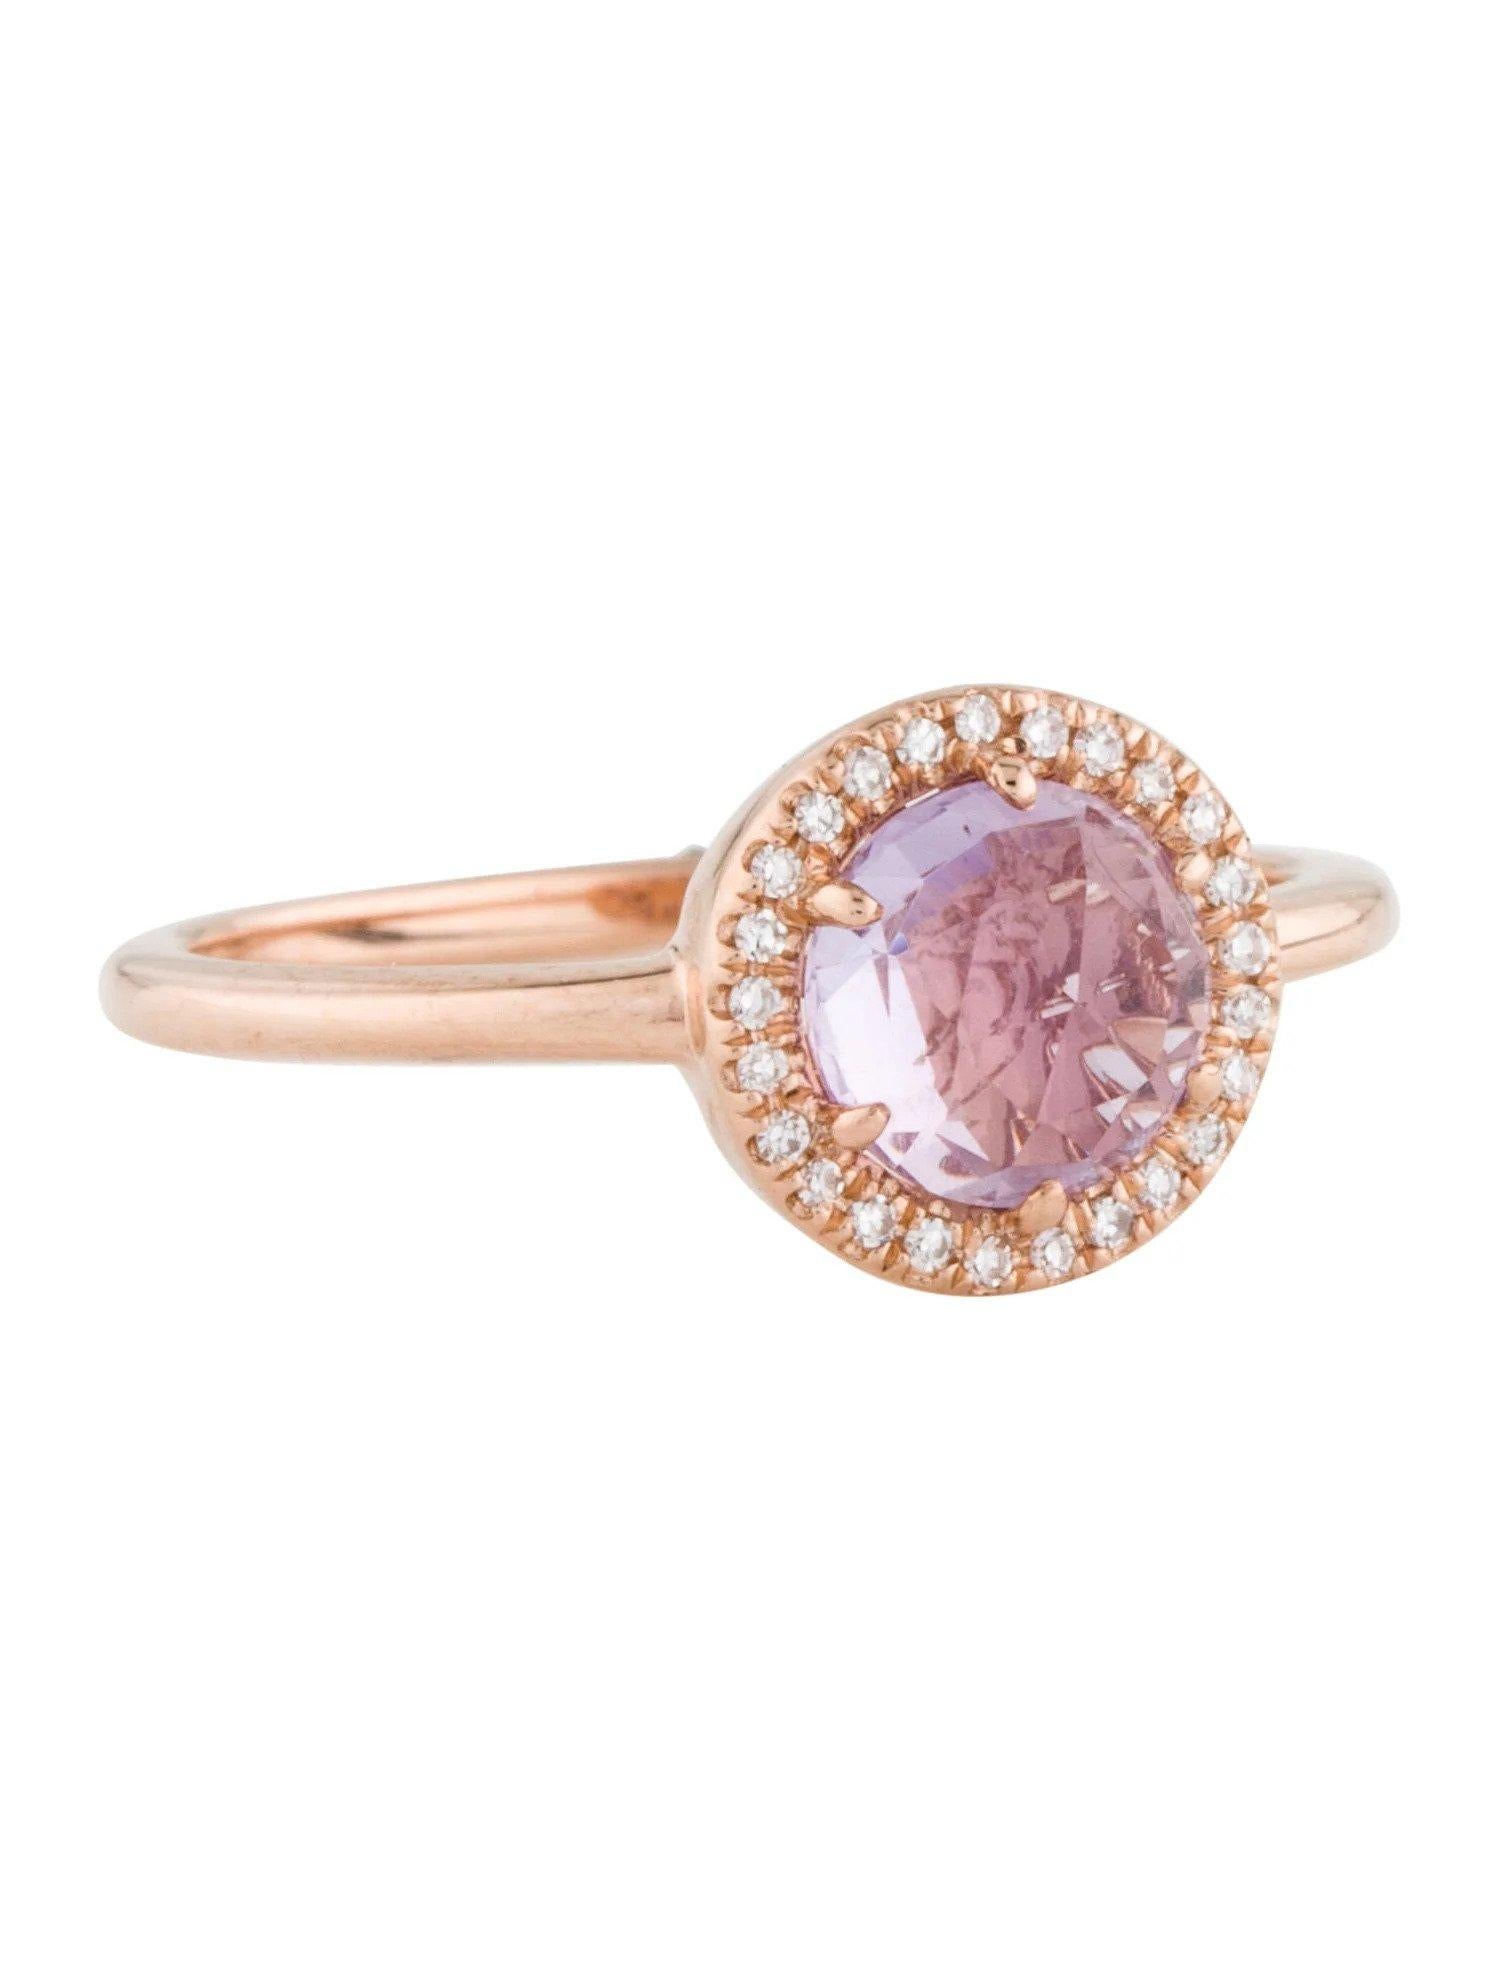 Round Cut 0.93 Carat Round Amethyst & Diamond Rose Gold Ring For Sale